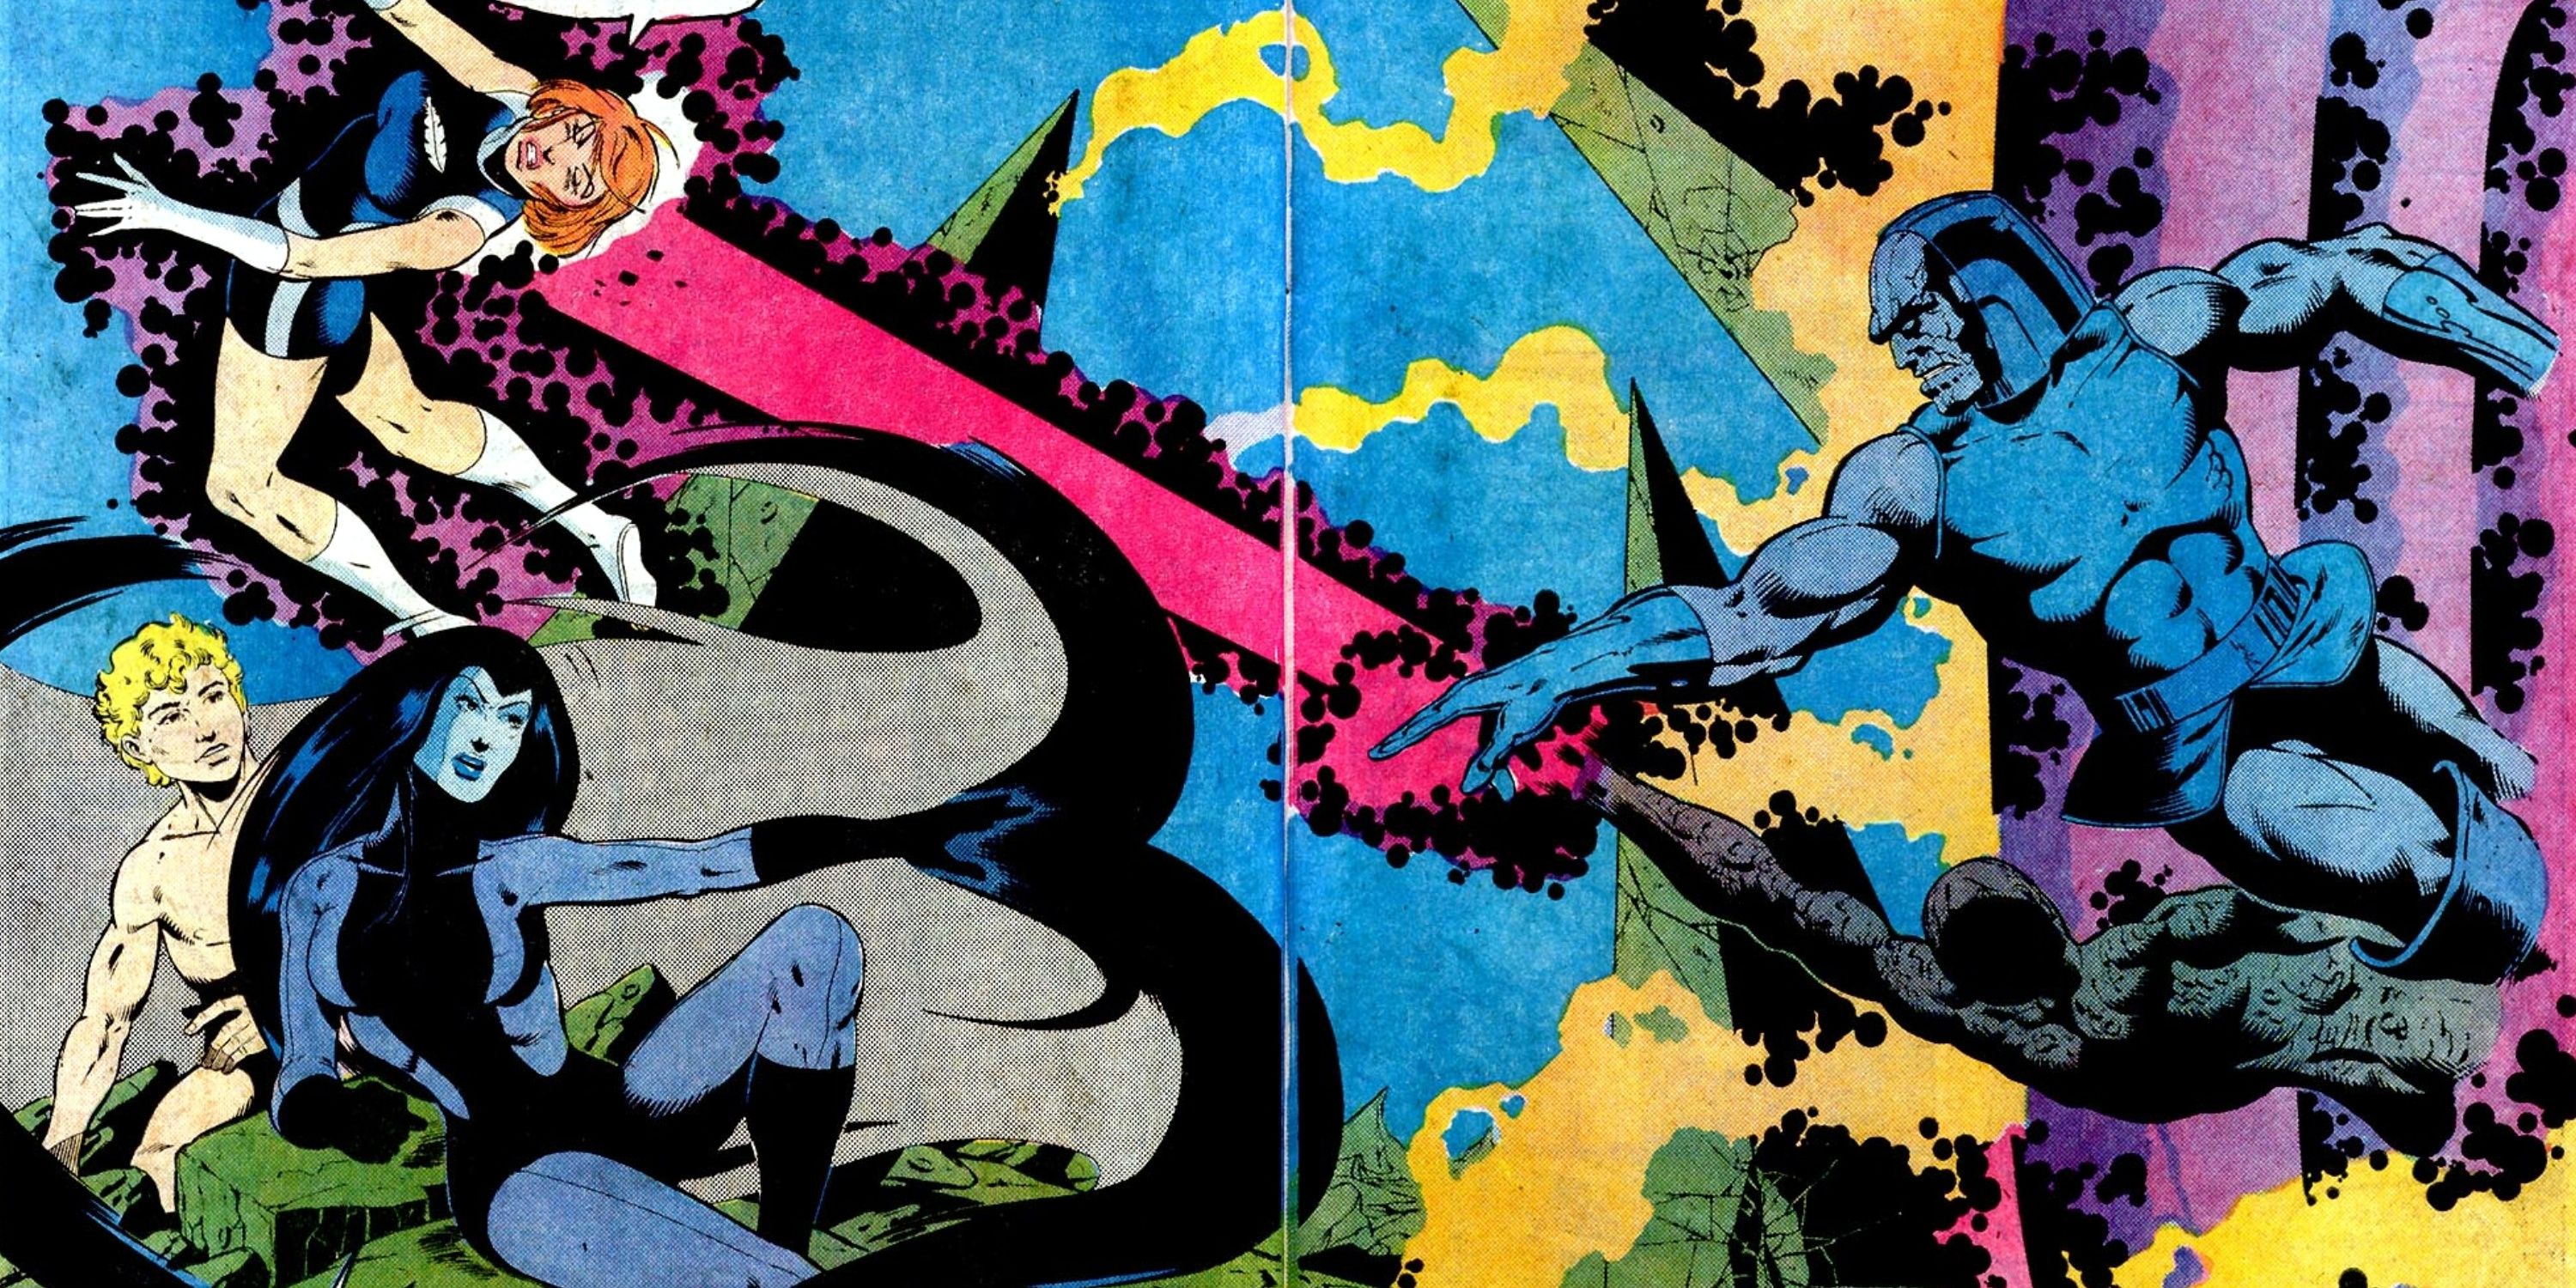 Darkseid reaching out to attack Shadow Lass in a double page spread that evokes the Sistine Chapel